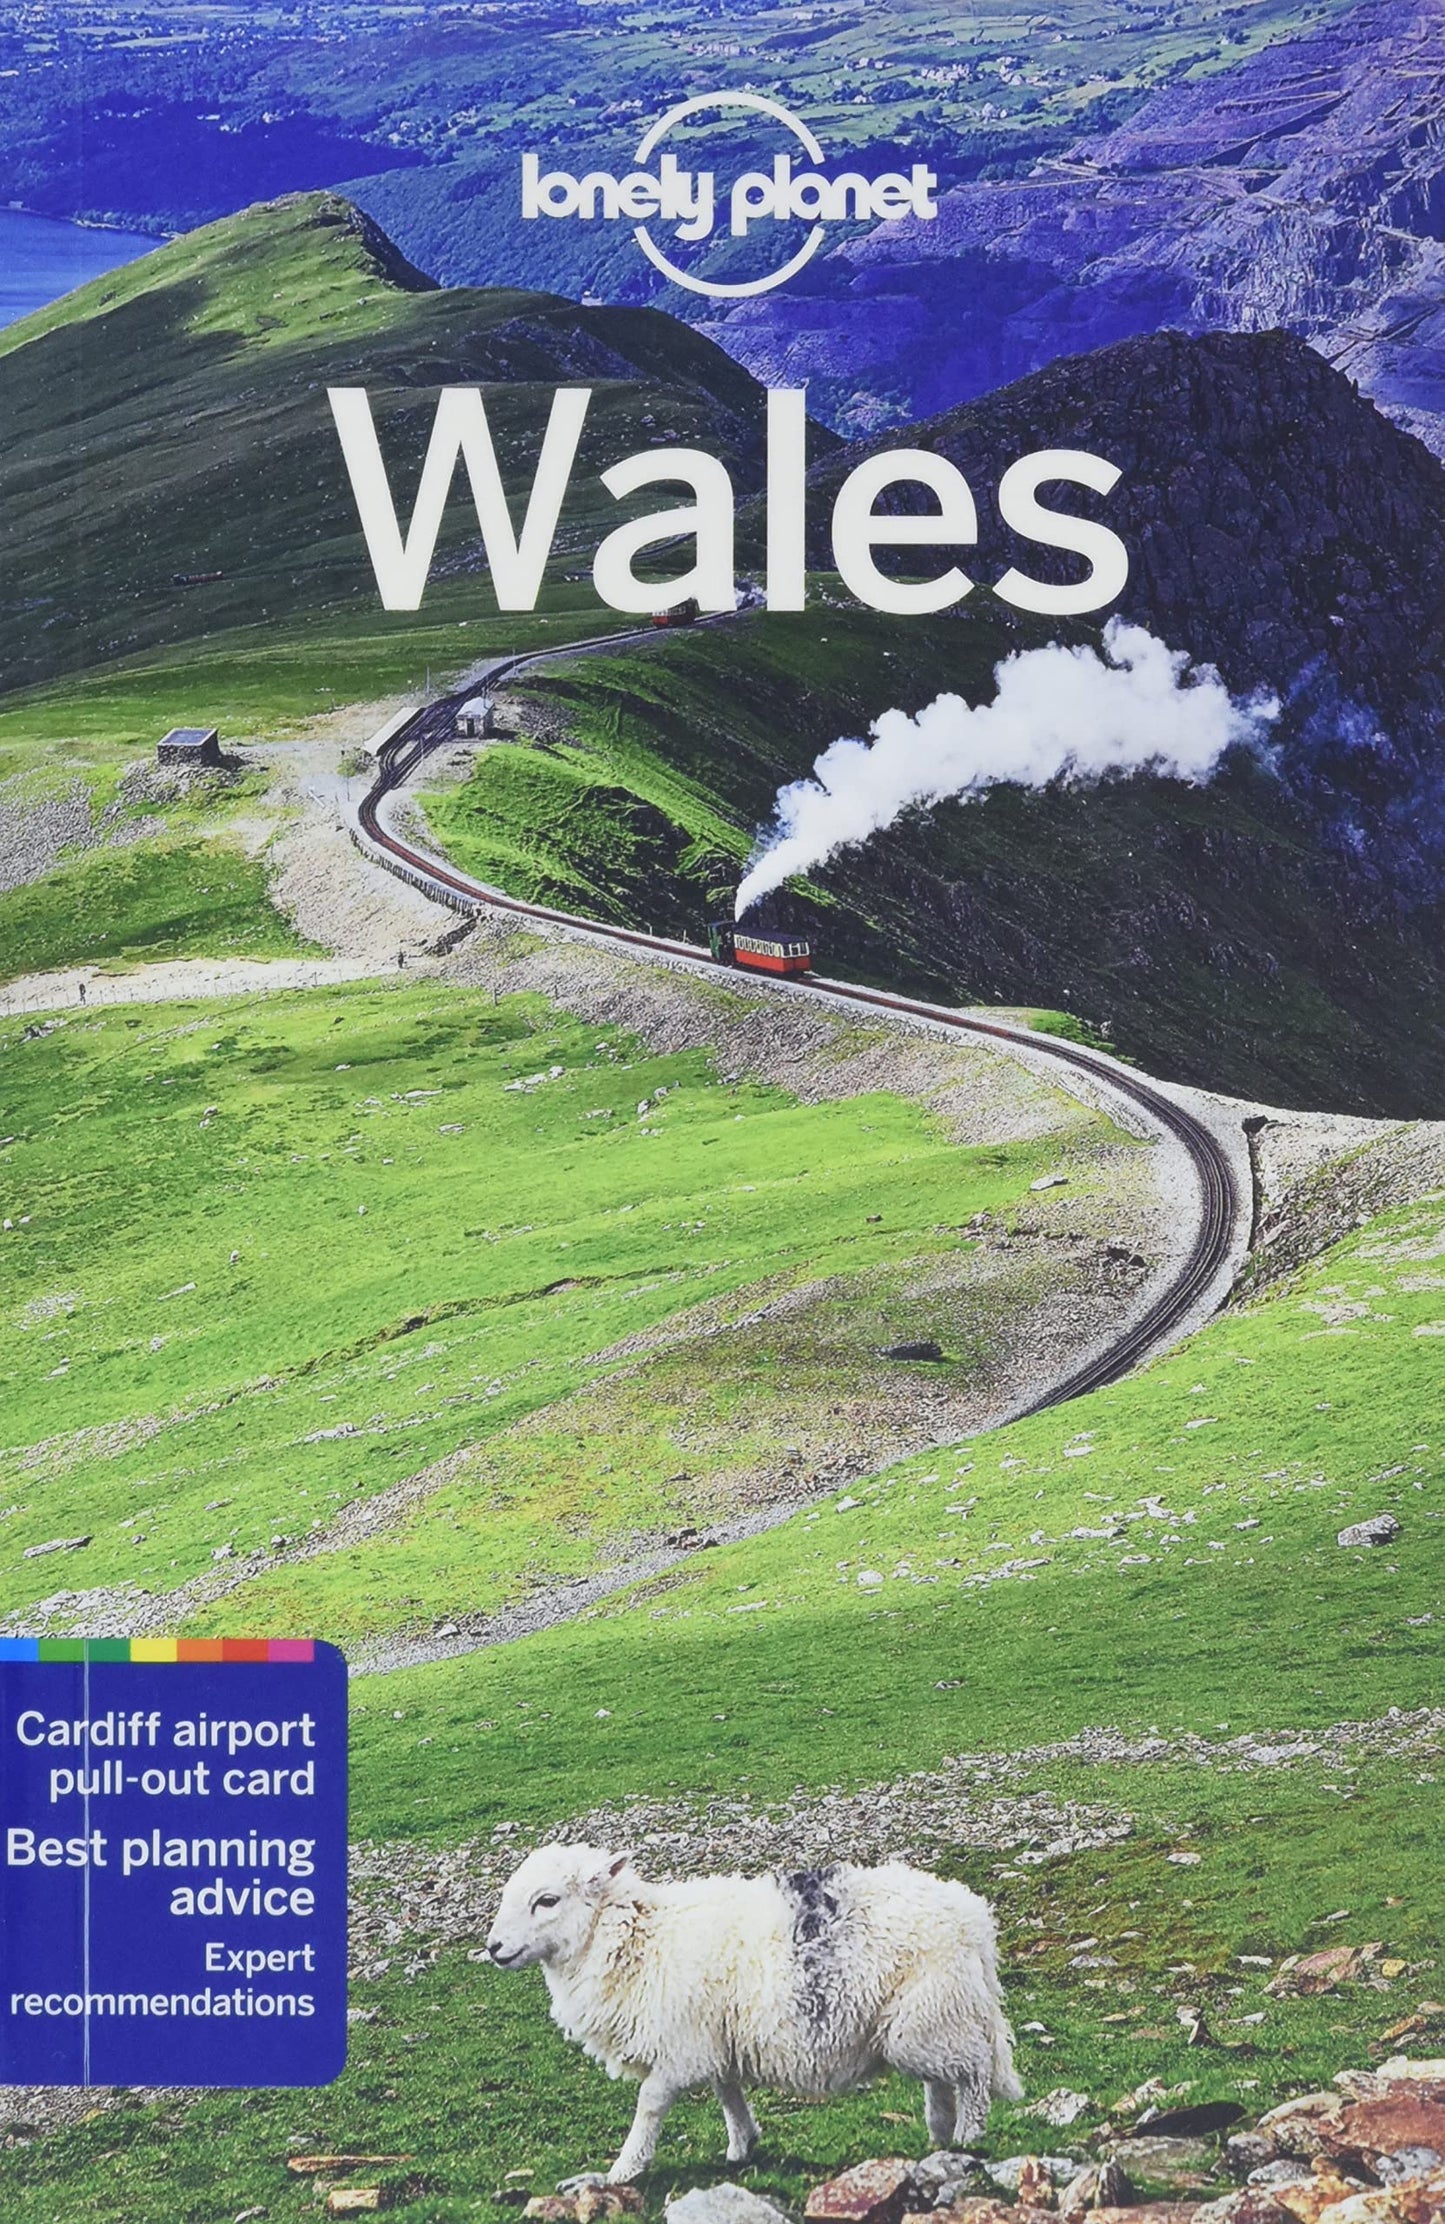 Book - Lonely Planet Wales - Paperback